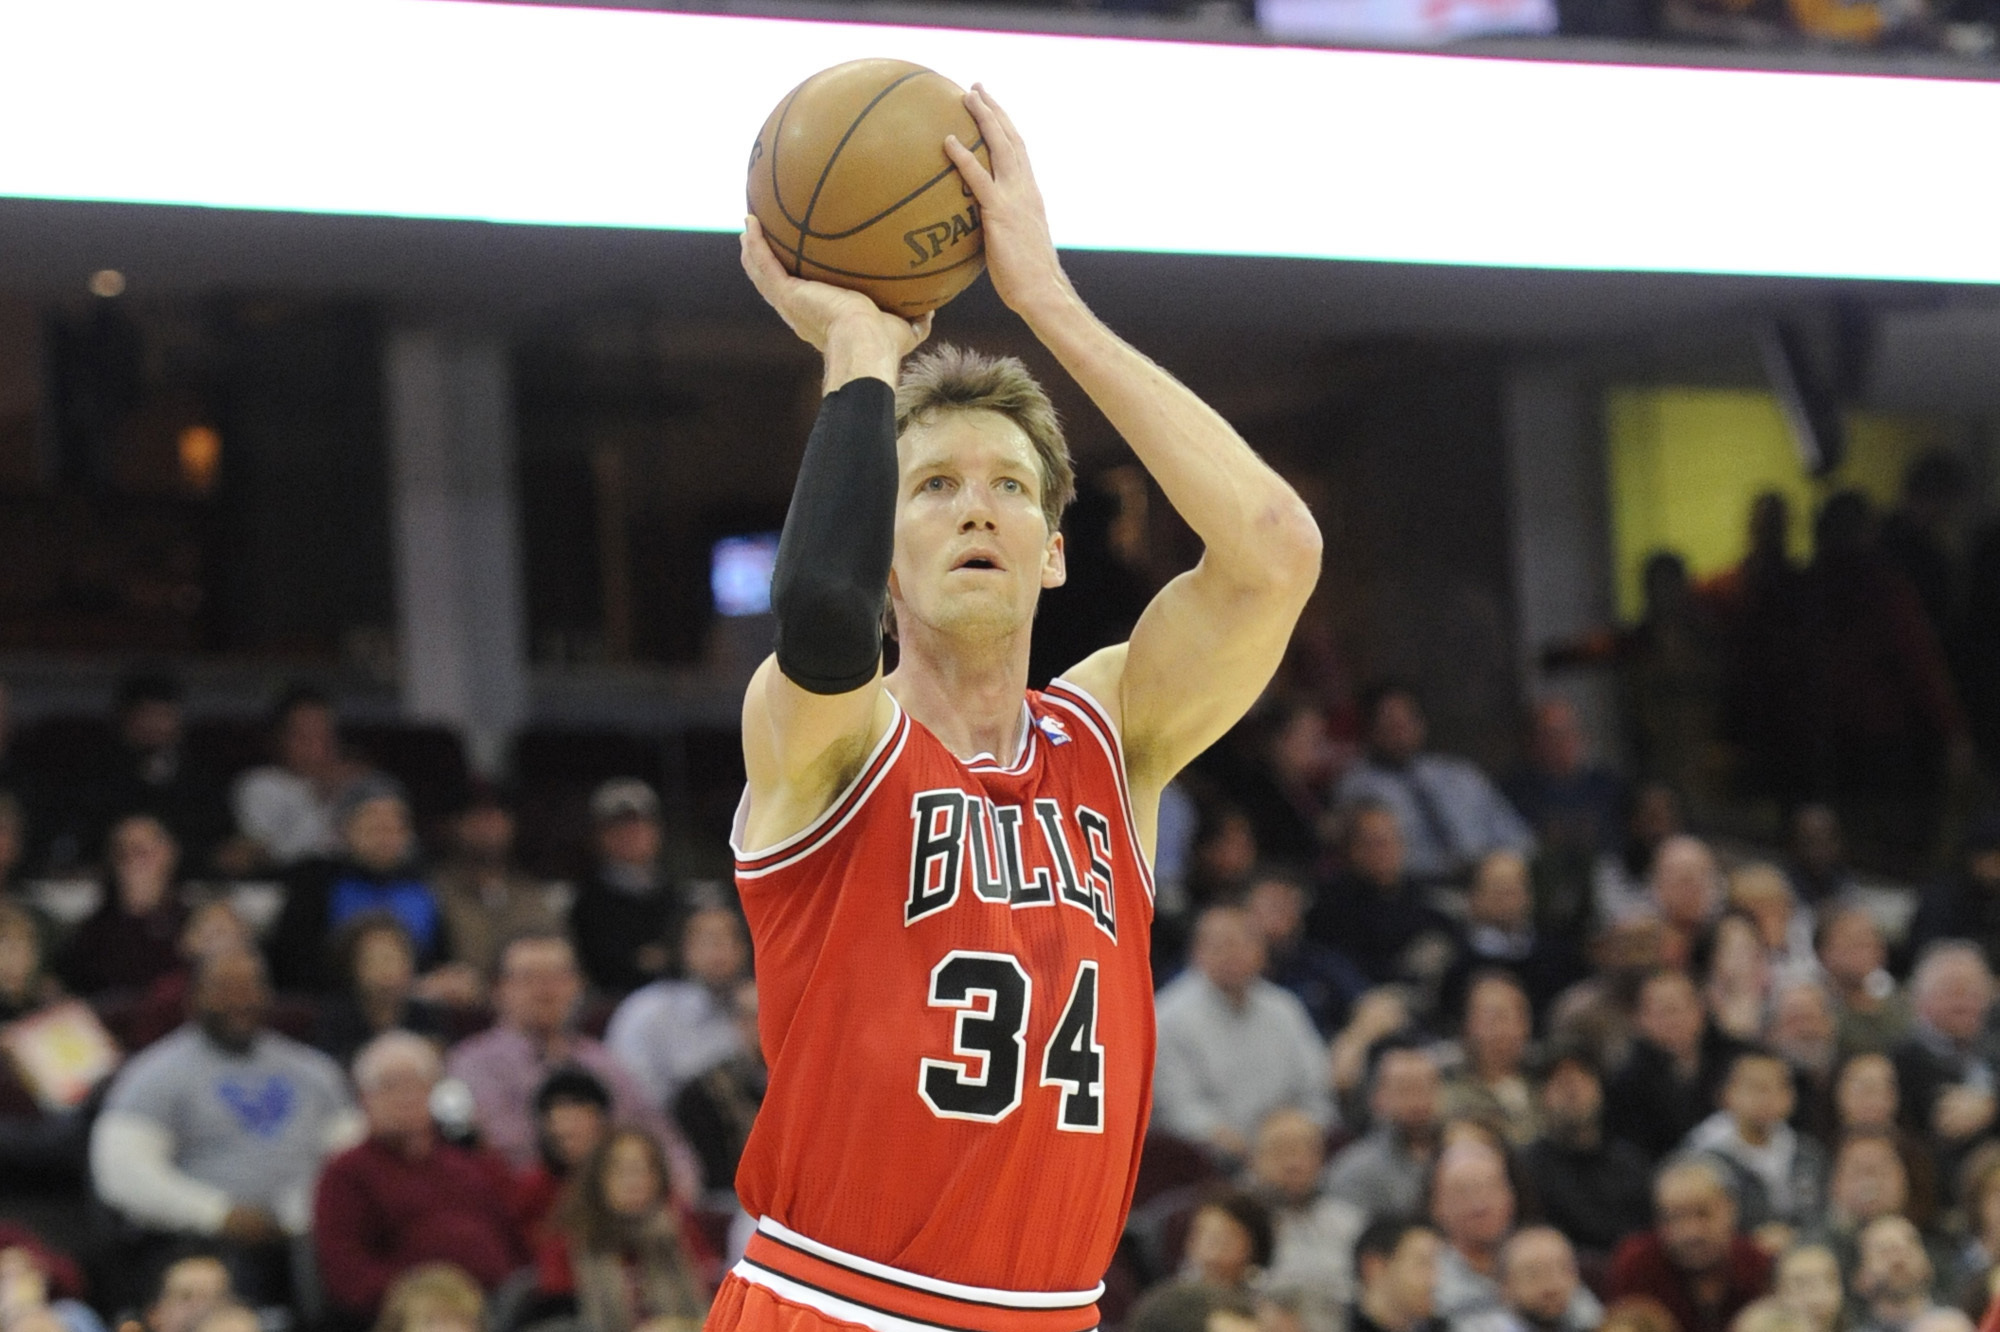 Cleveland Cavaliers: After Mike Dunleavy Jr.?